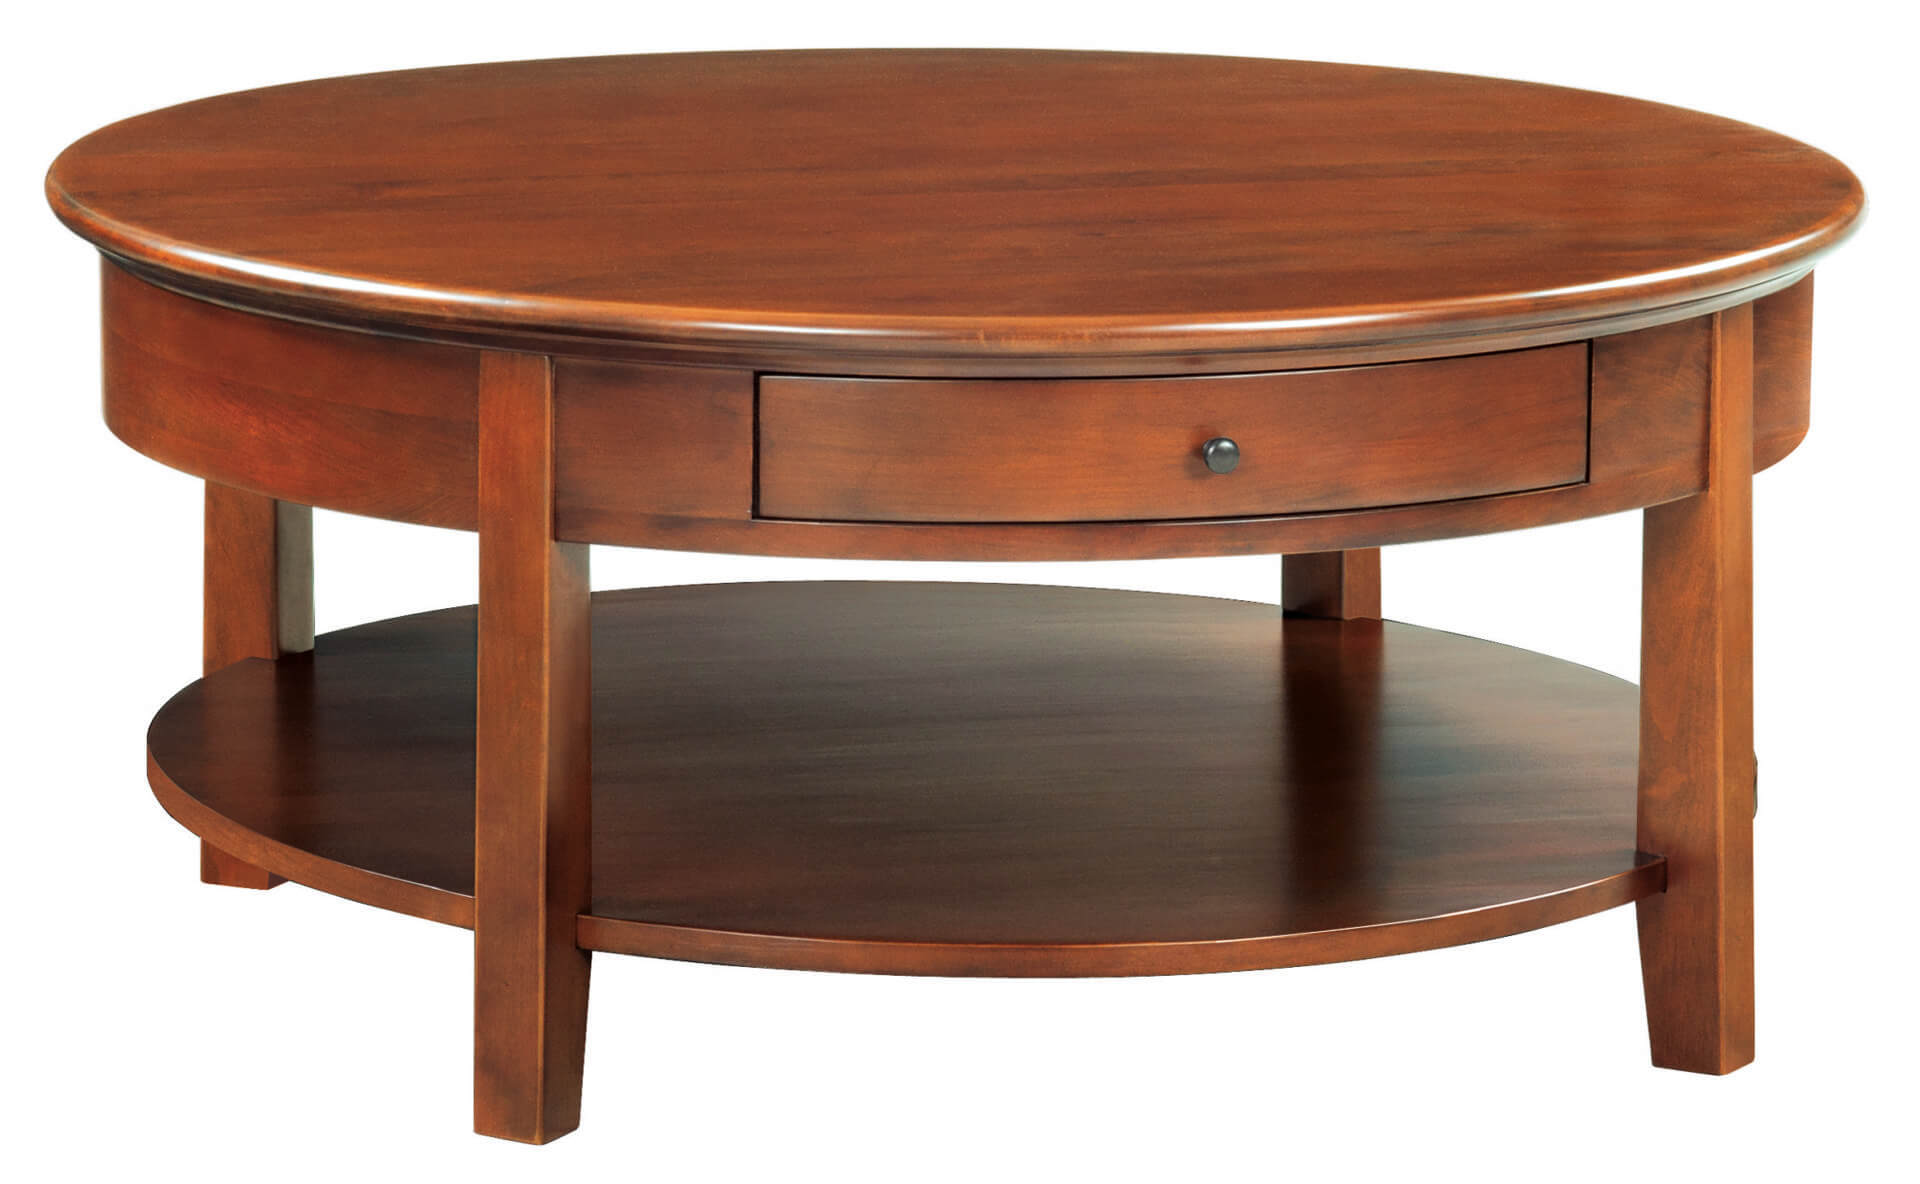 3512 Mckenzie Round Tail Table, Vintage Round Coffee Table With Drawers